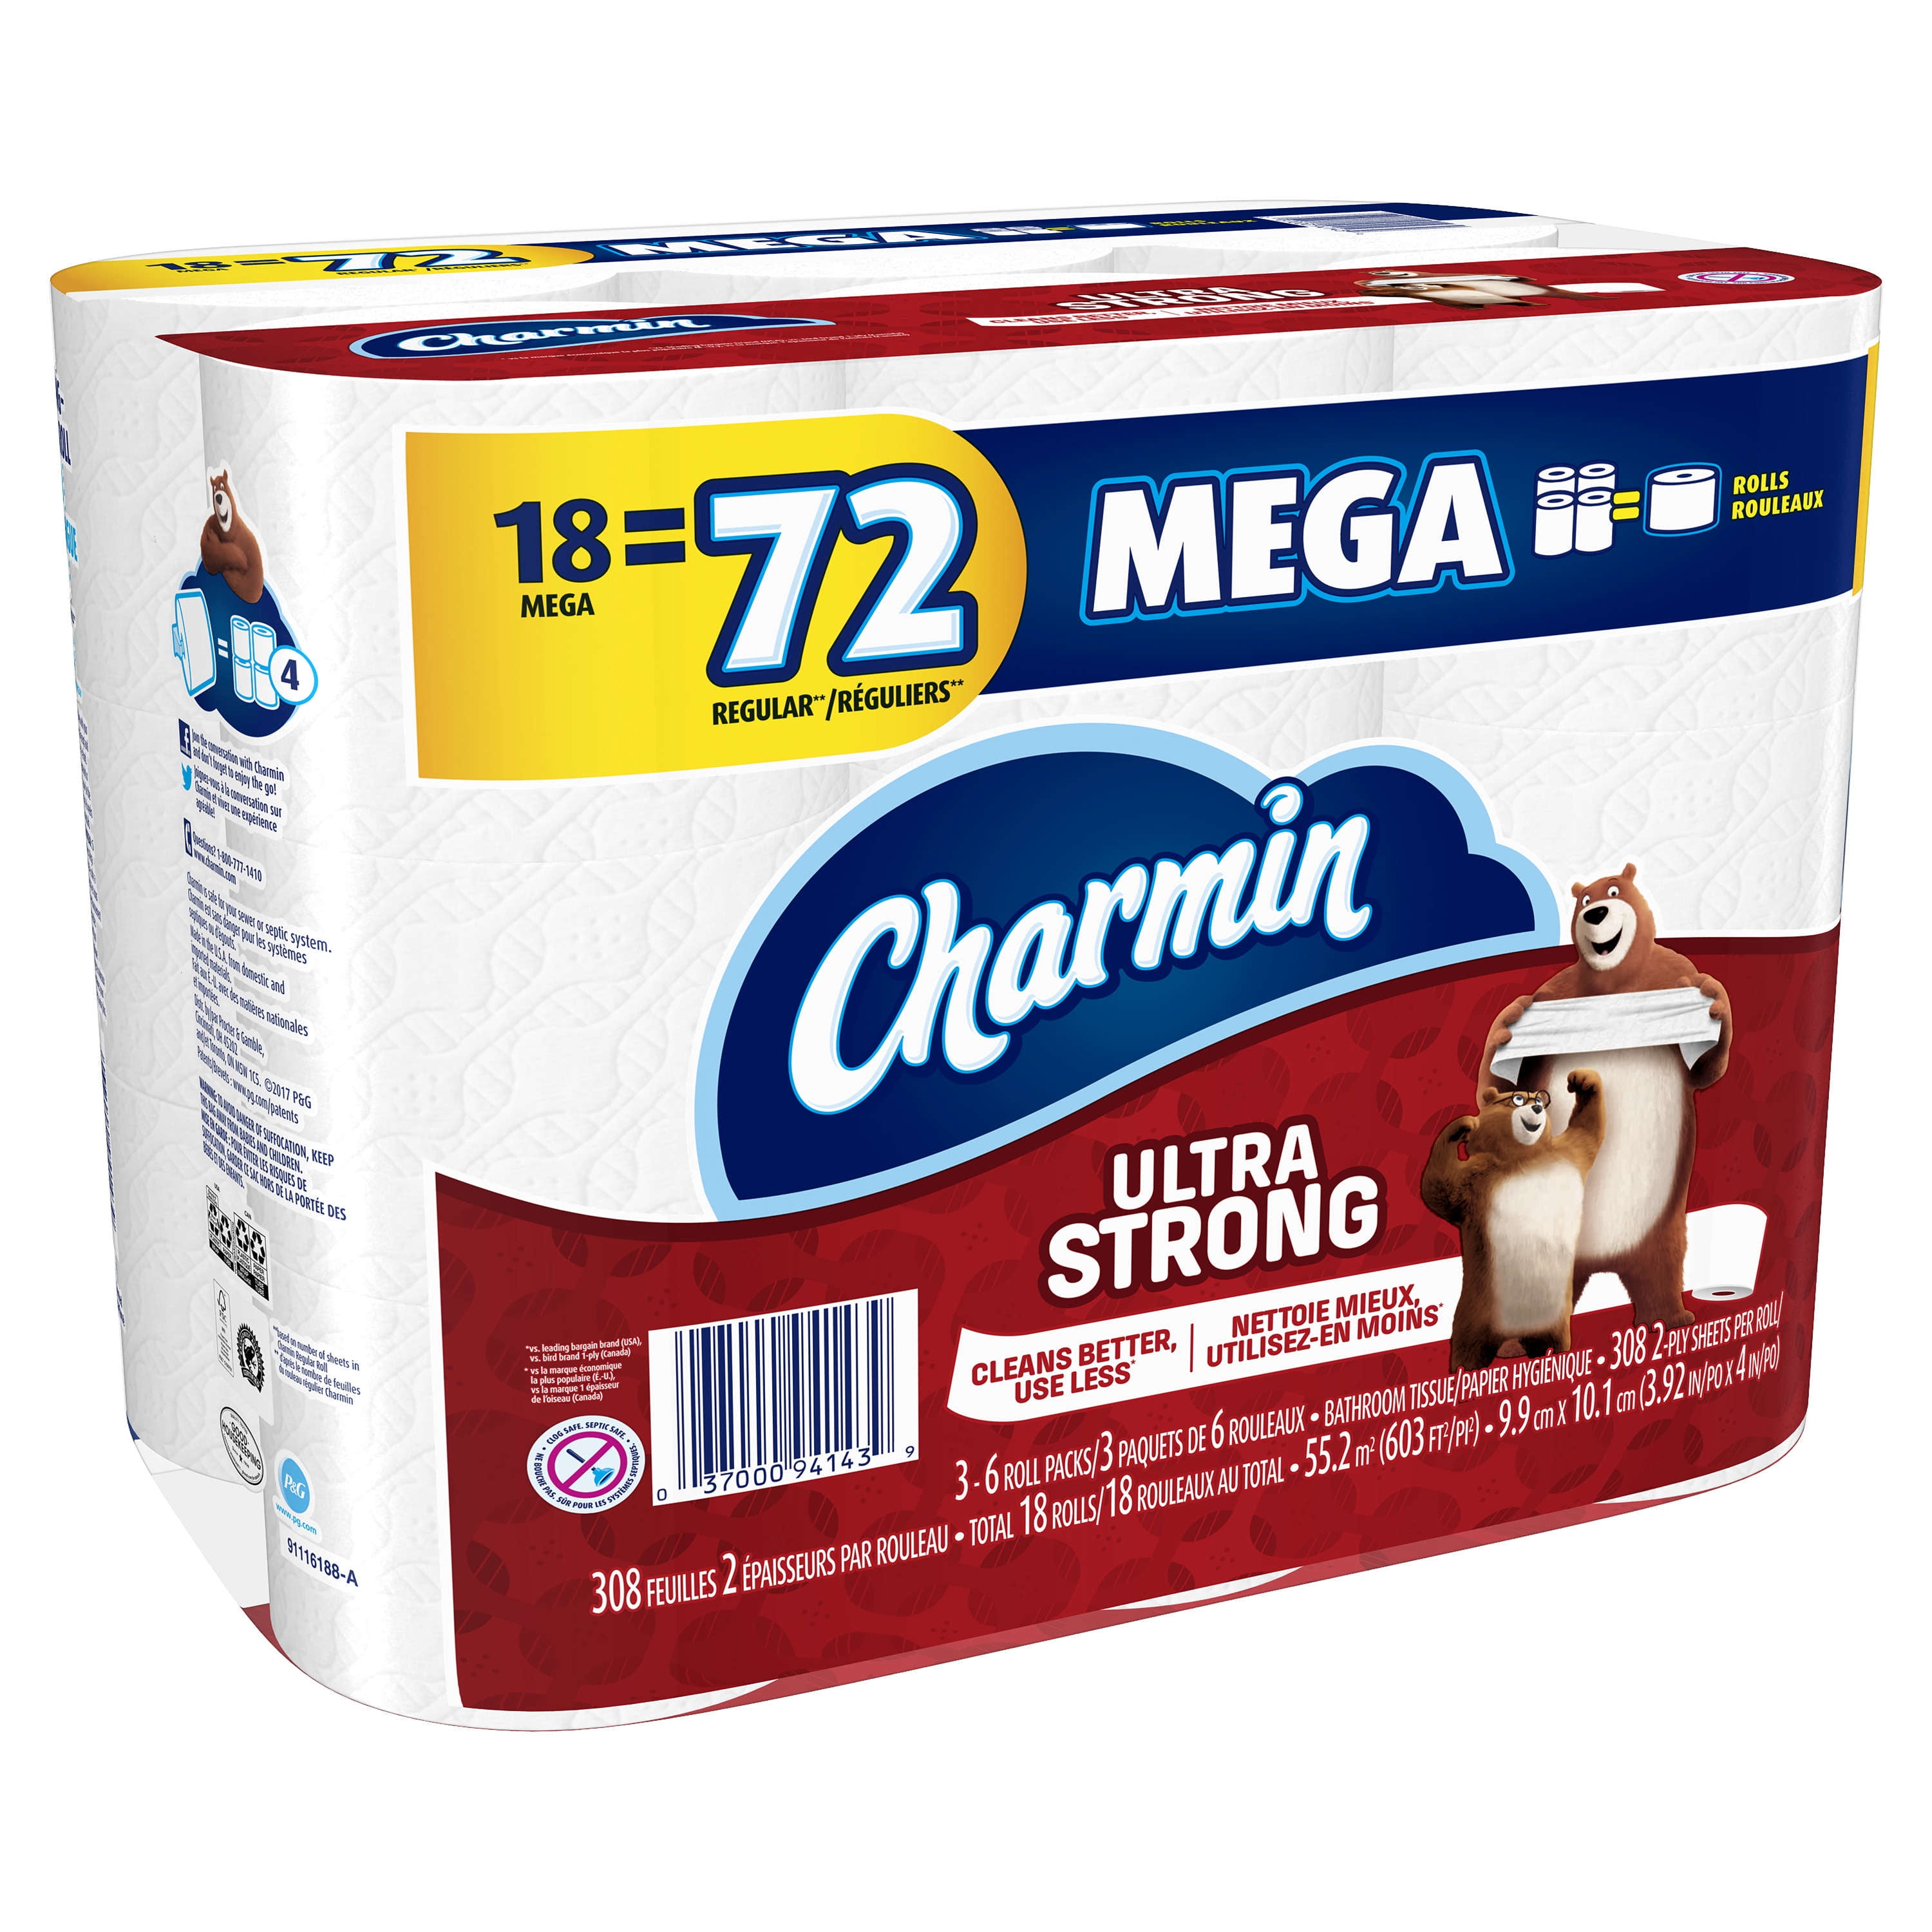 Charmin Ultra Soft tissue Lot of 6 Bundle 72 Rolls SPECIAL REQUEST